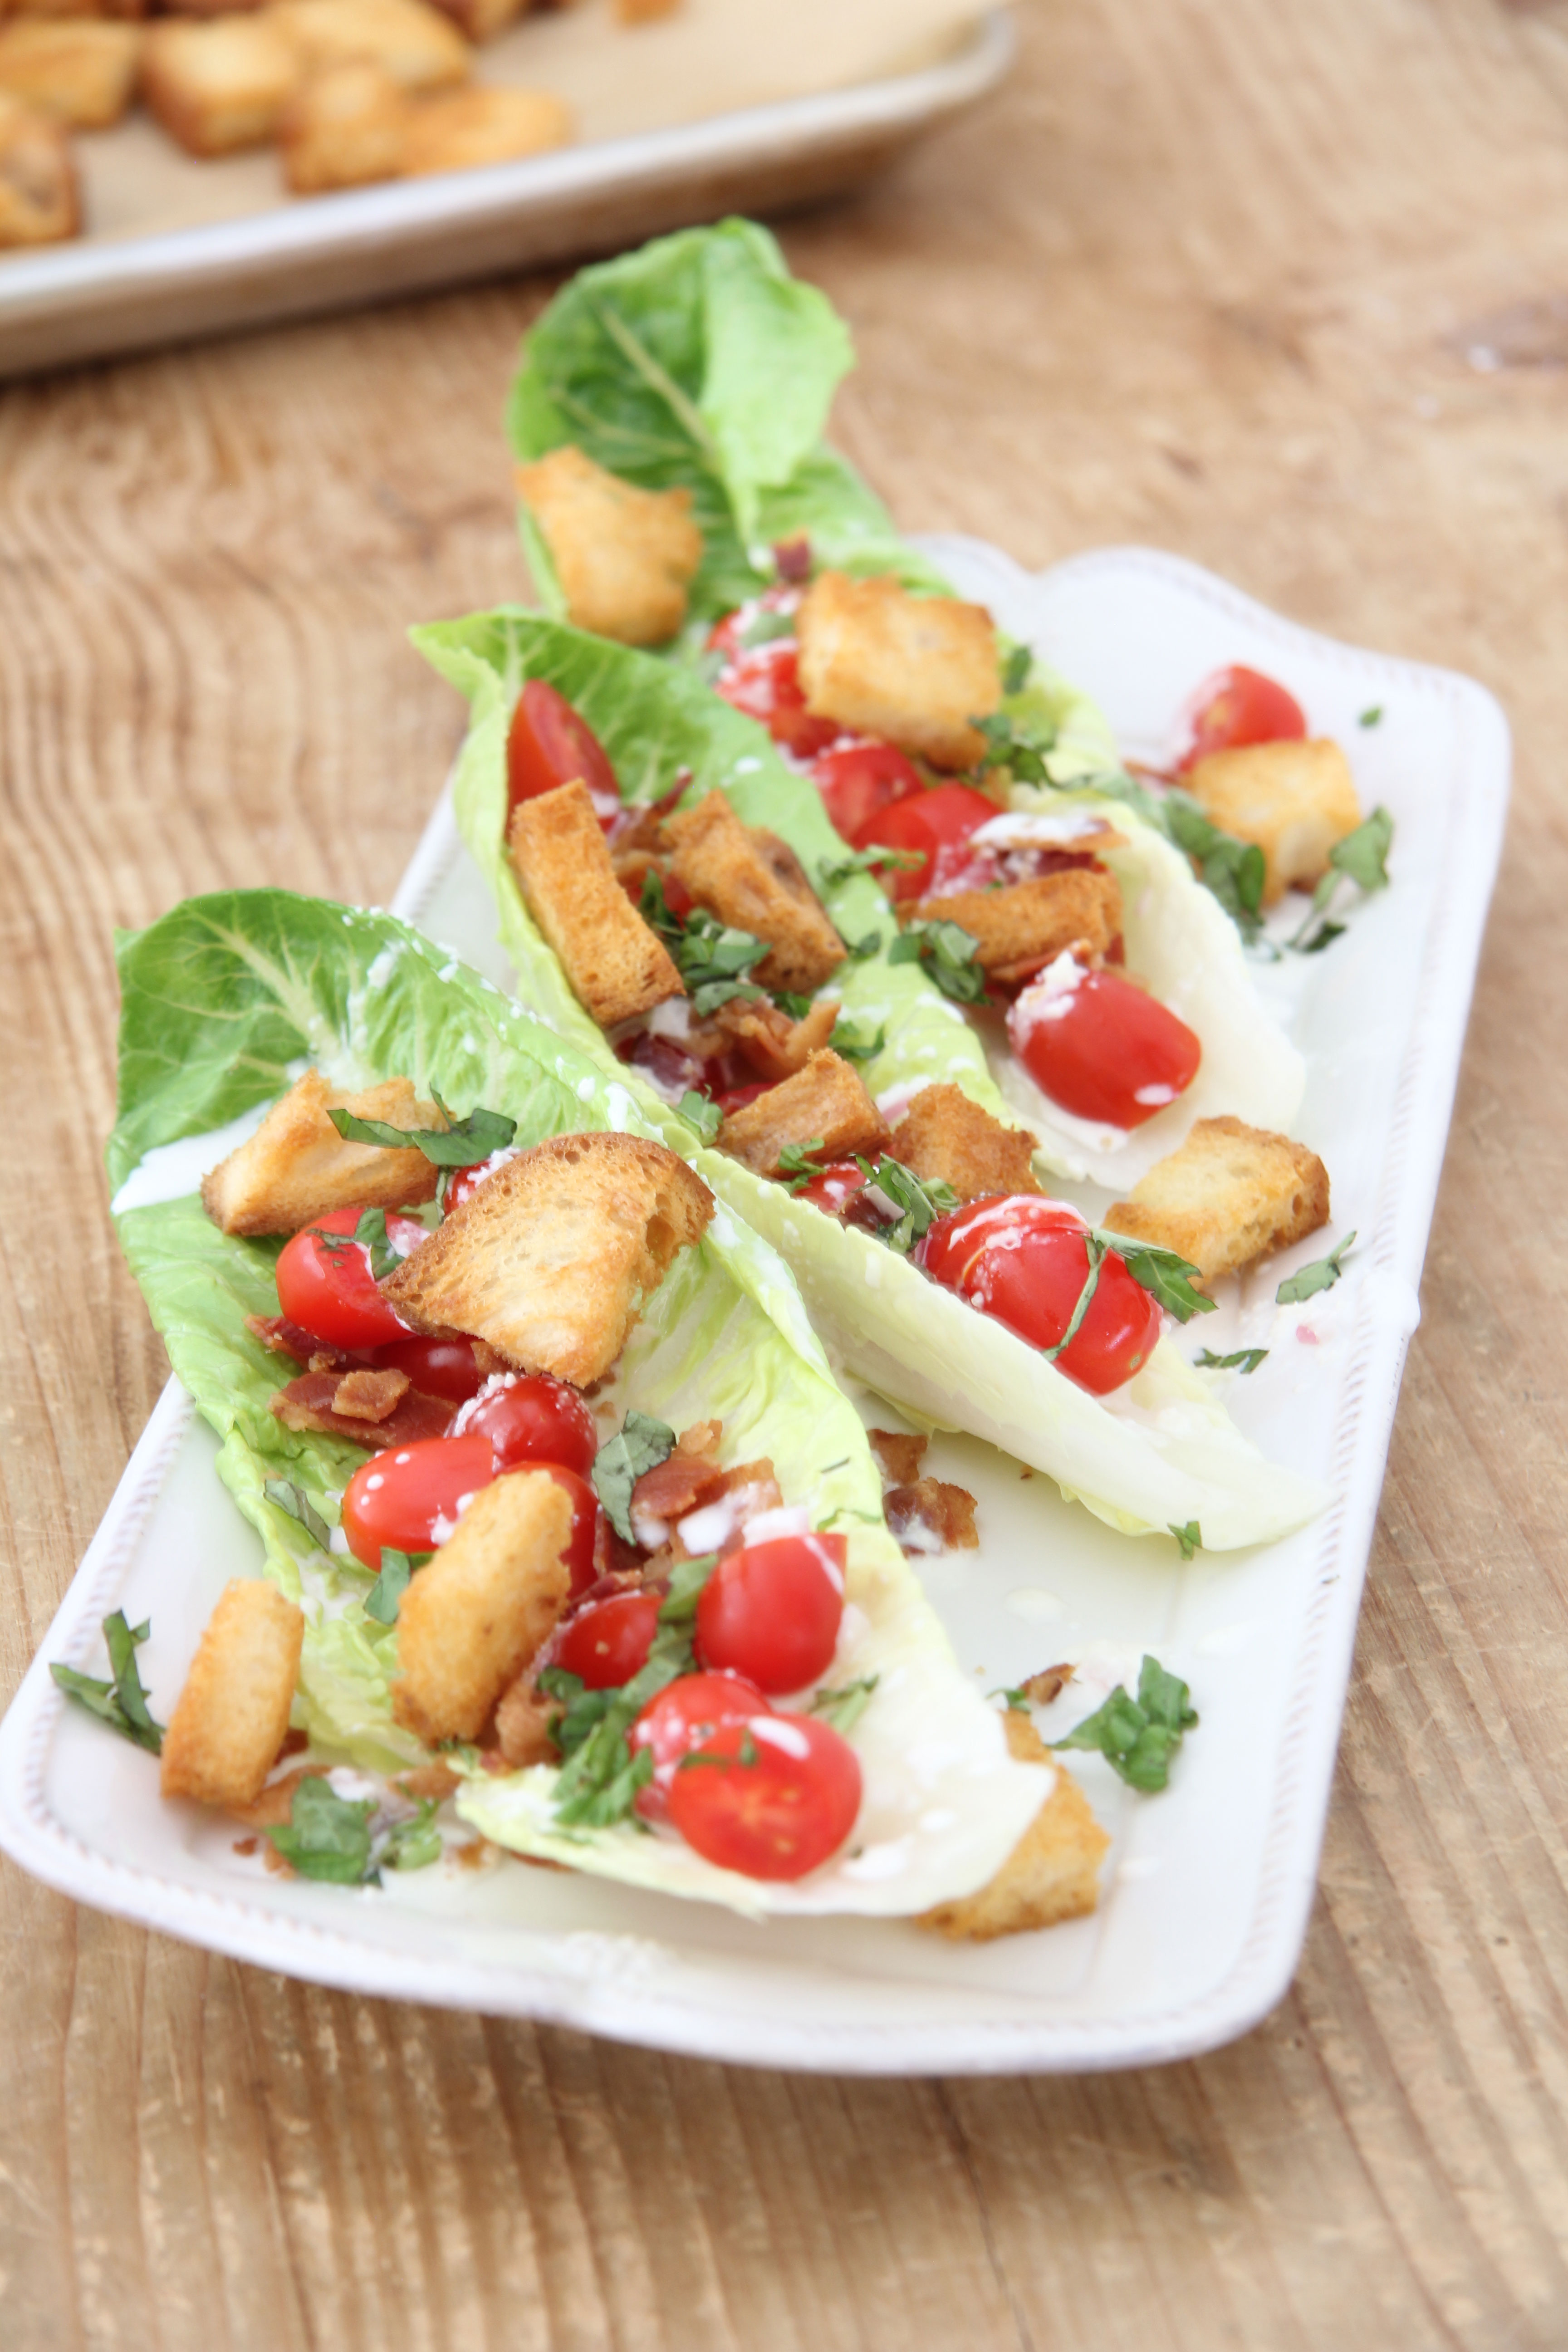 Love a BLT Sandwich? This BLT Salad with Buttermilk-Parmesan Dressing and Buttery Croutons is the next best thing.. maybe even better! YUM!